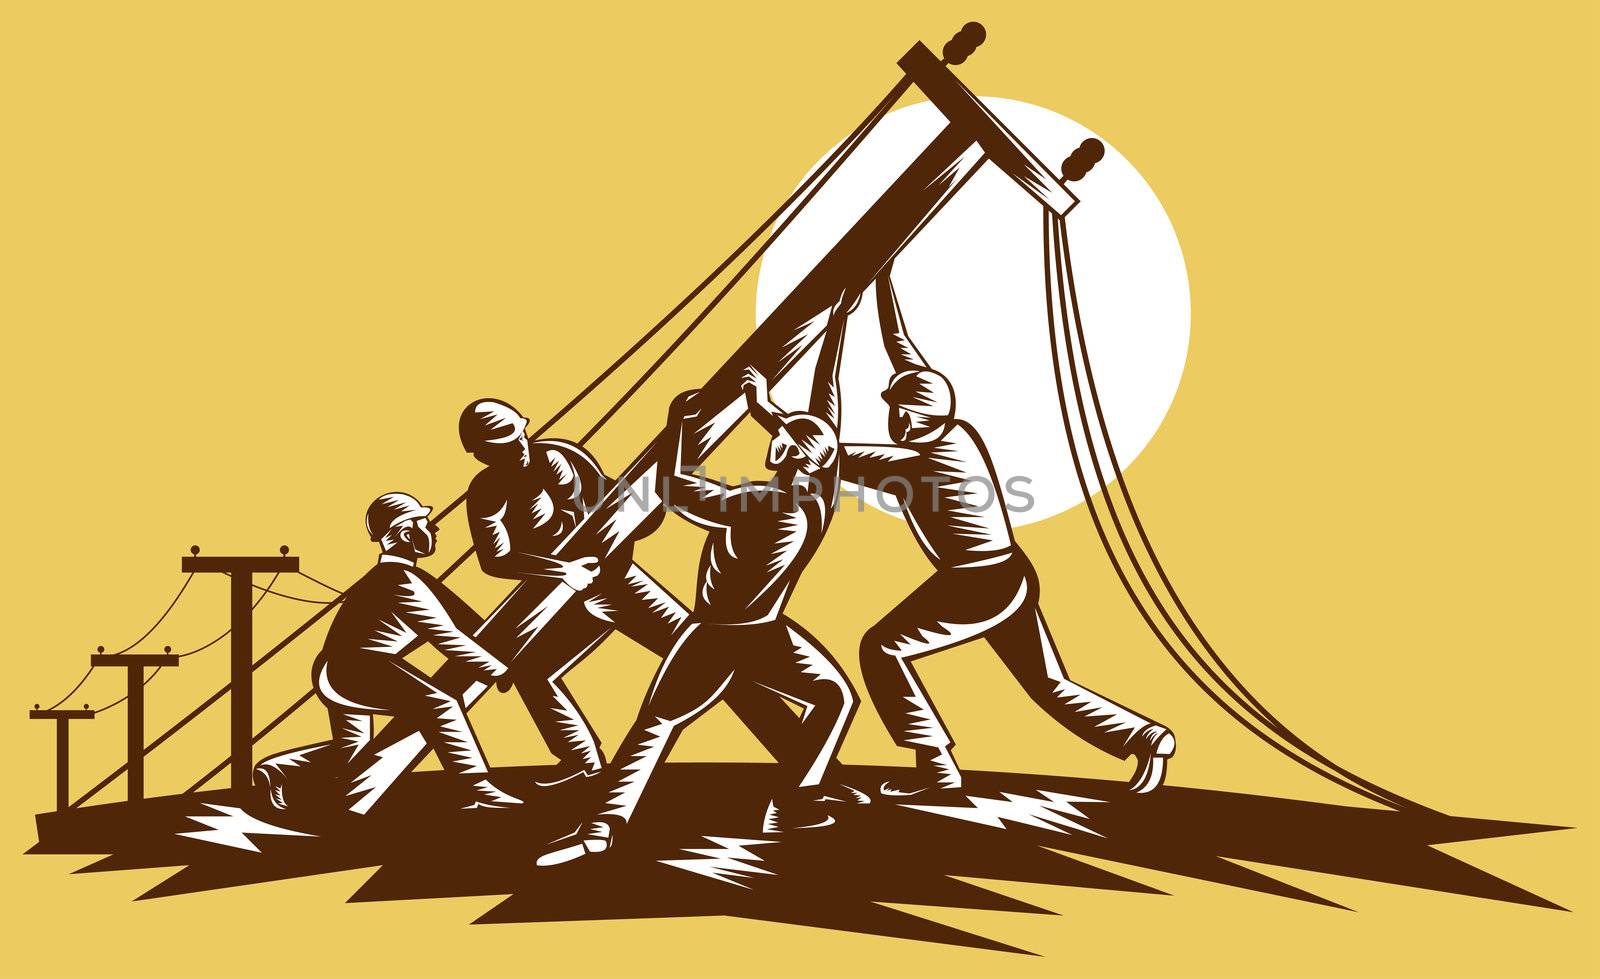 illustration of a Team of linemen raising up electricity post done in reteo woodcut style.